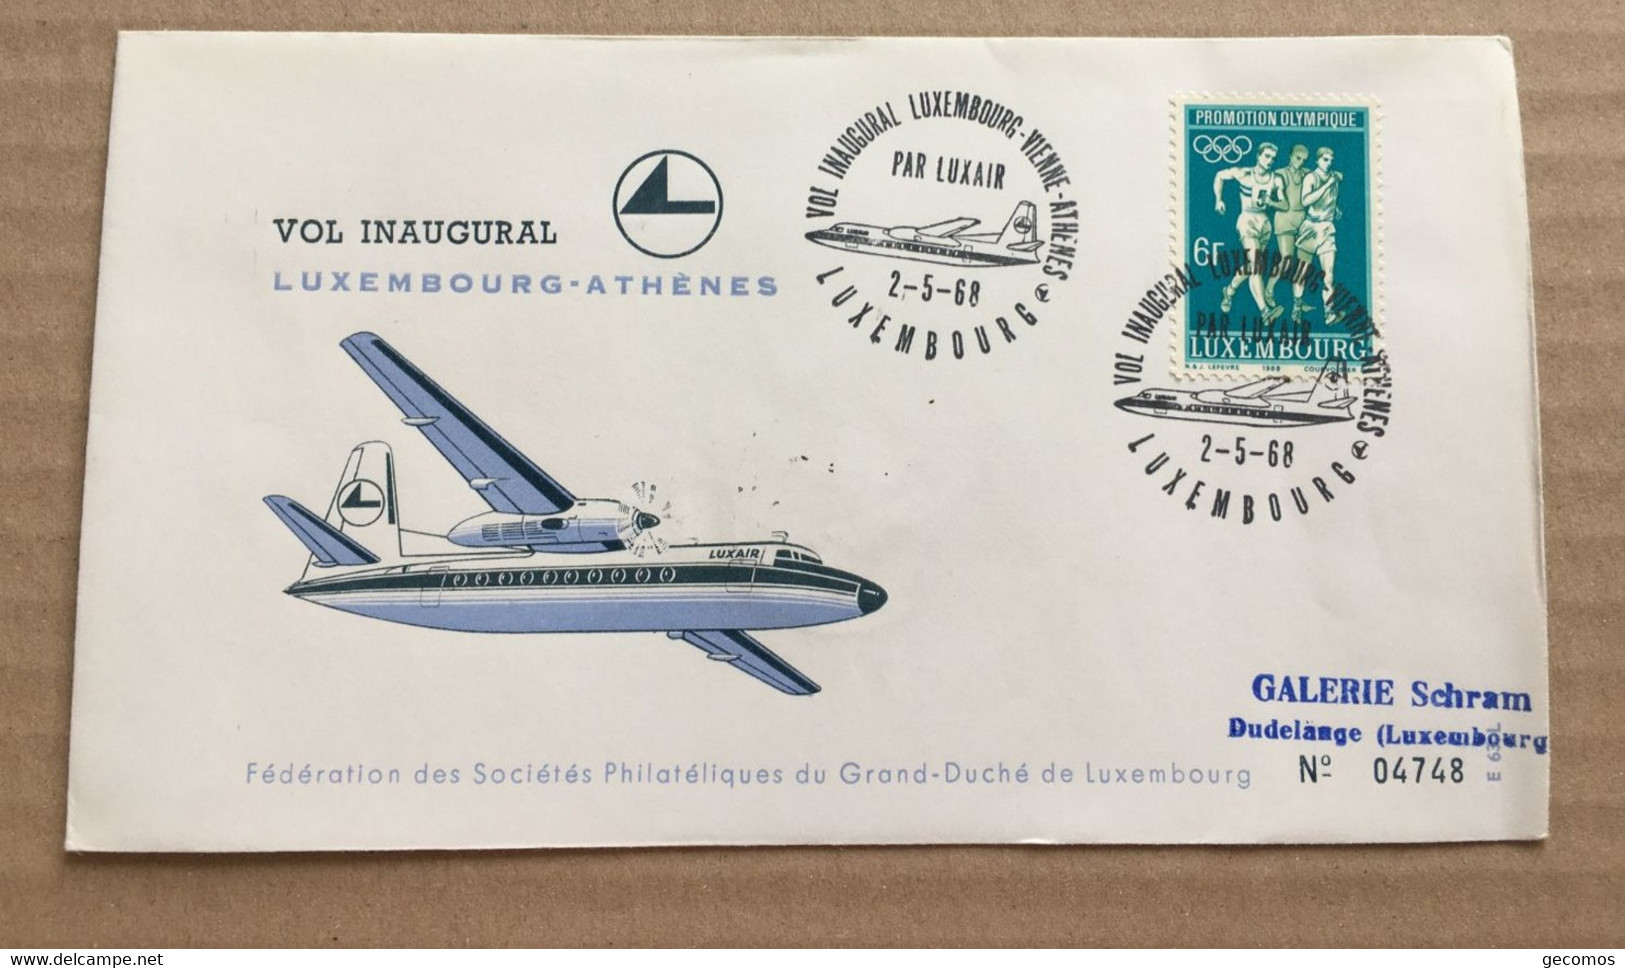 VOL INAUGURAL LUXEMBOURG-ATHENES 2-5-68 - (Avion LUXAIR) - Timbre Promotion Olympique LUXEMBOURG. - Lettres & Documents